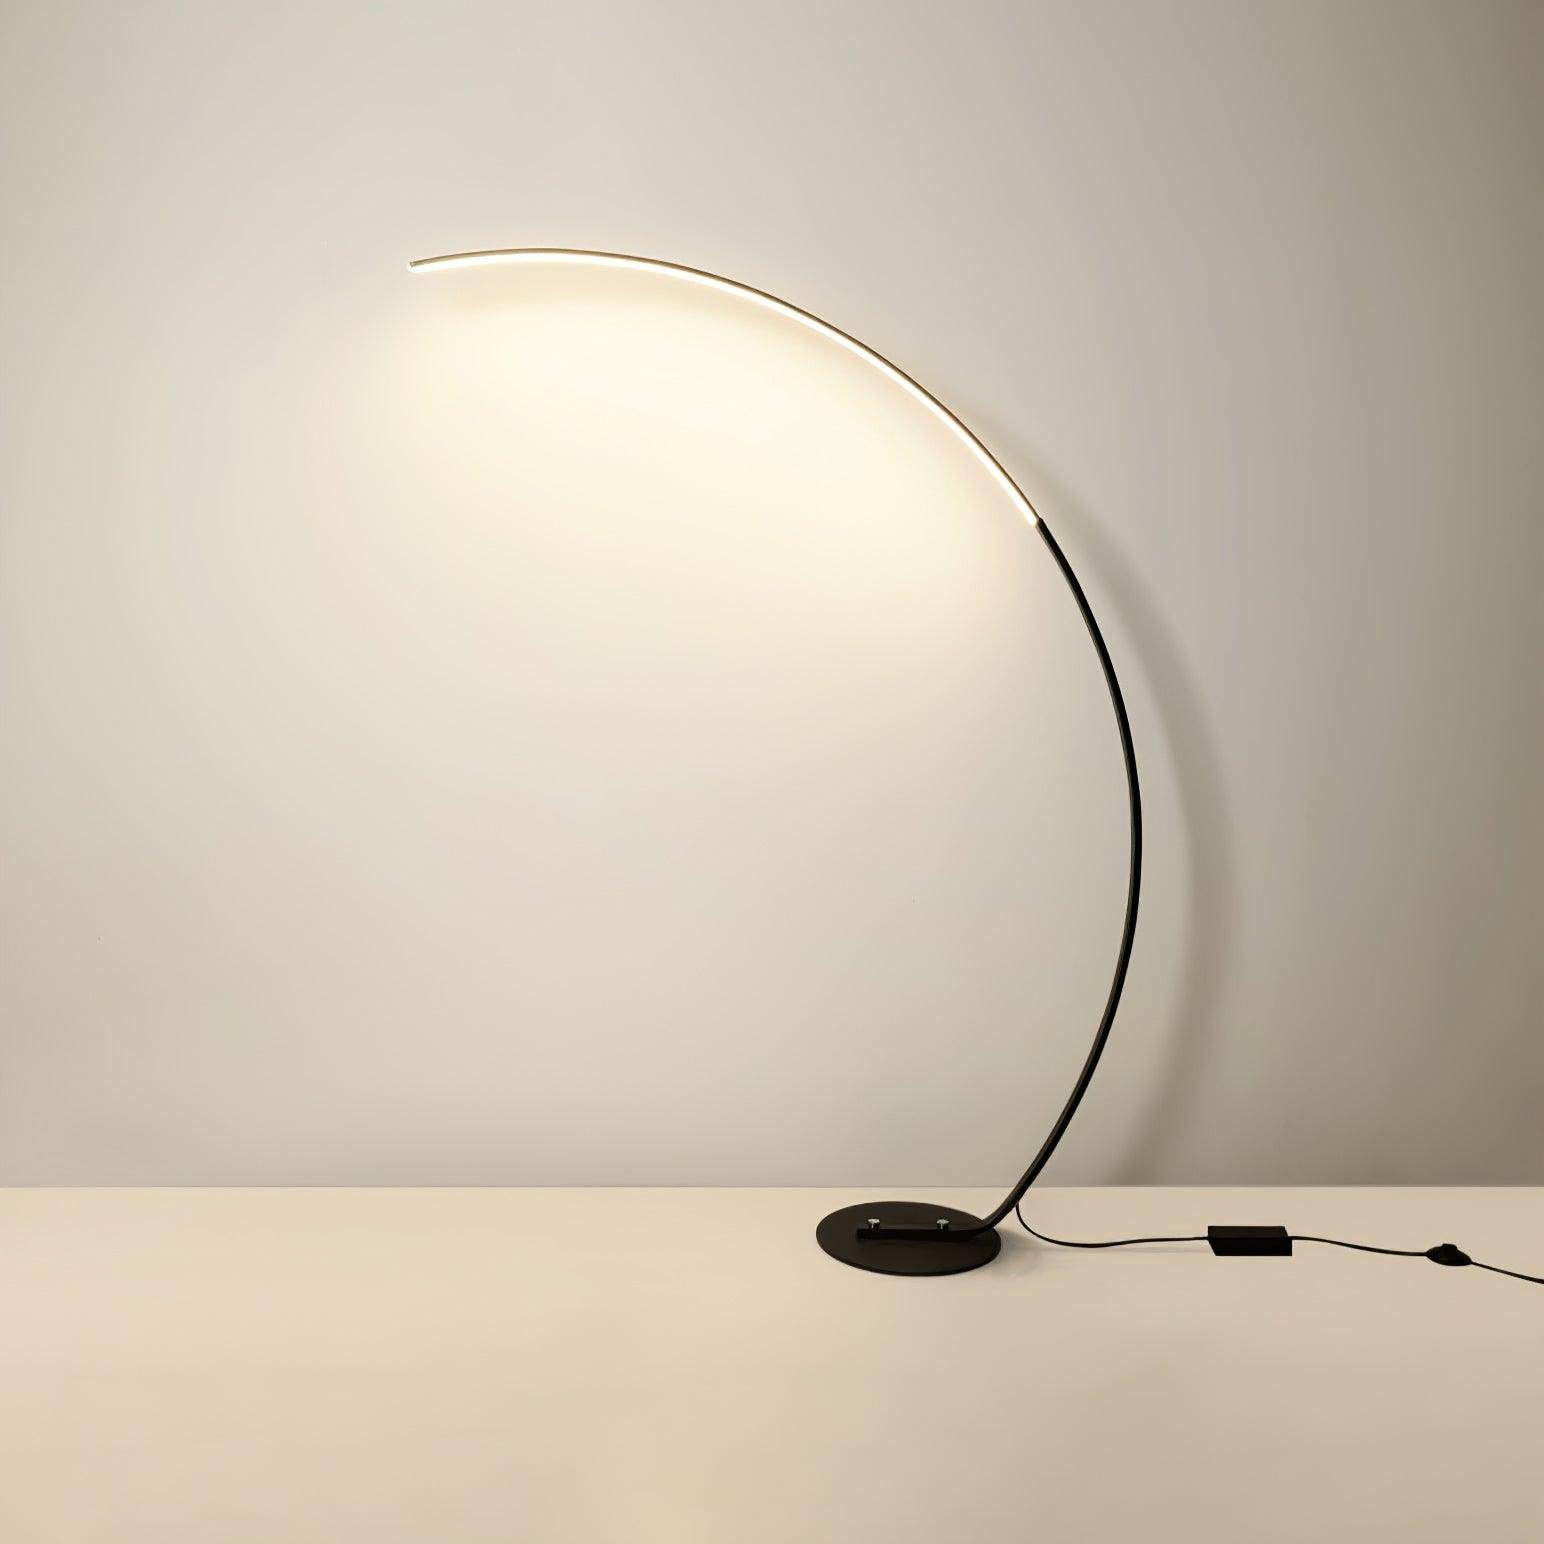 Black Arc Floor Lamp with a height of 66.9 inches (170cm) and a width of 47.2 inches (120cm), equipped with a UK plug.